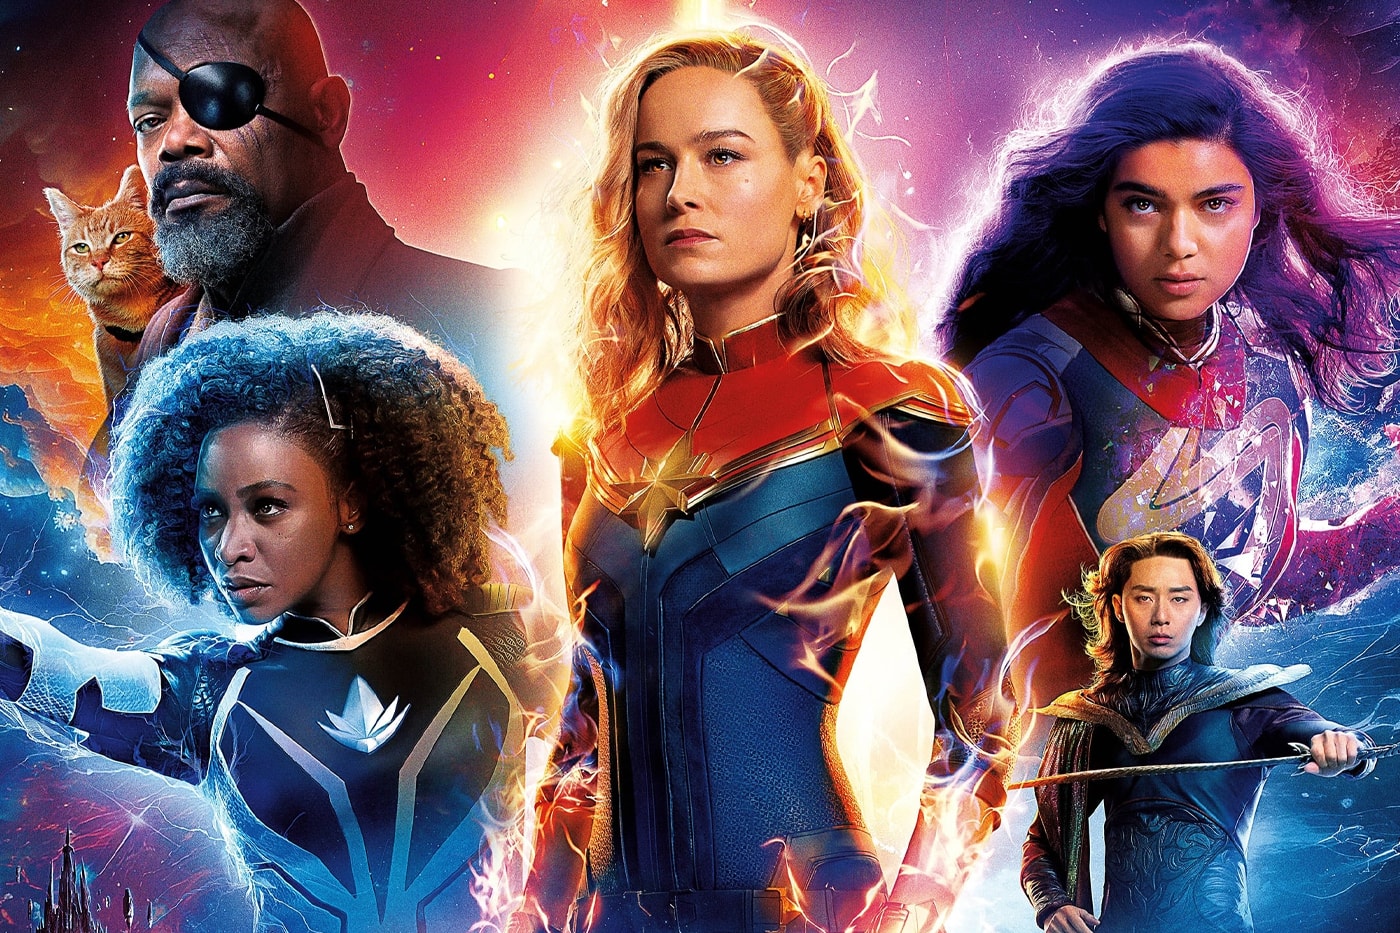 The Marvels' Lowest Grossing MCU Movie in History